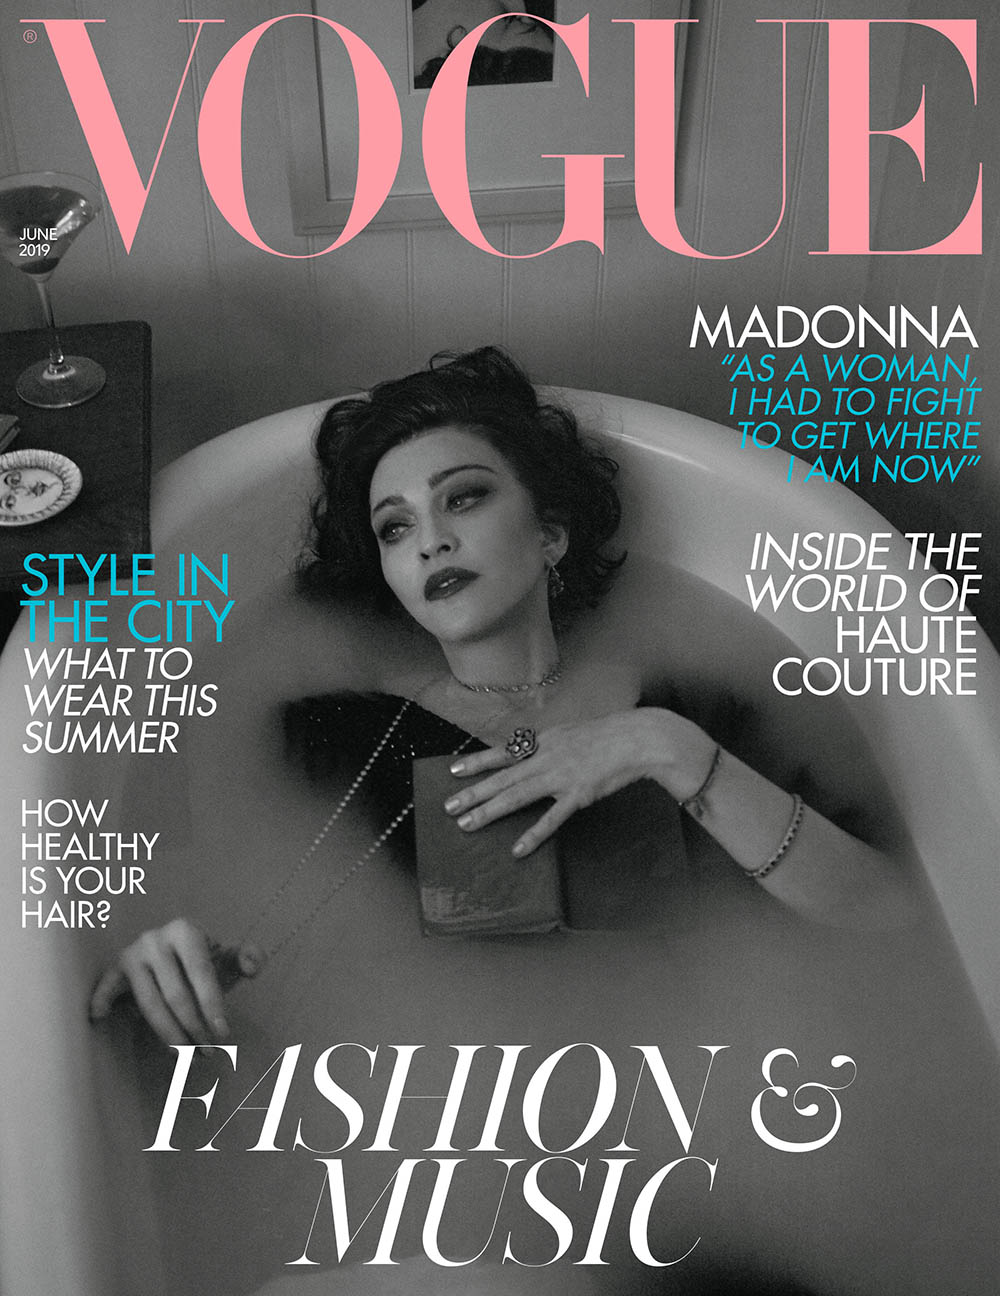 Madonna covers British Vogue June 2019 by Mert & Marcus